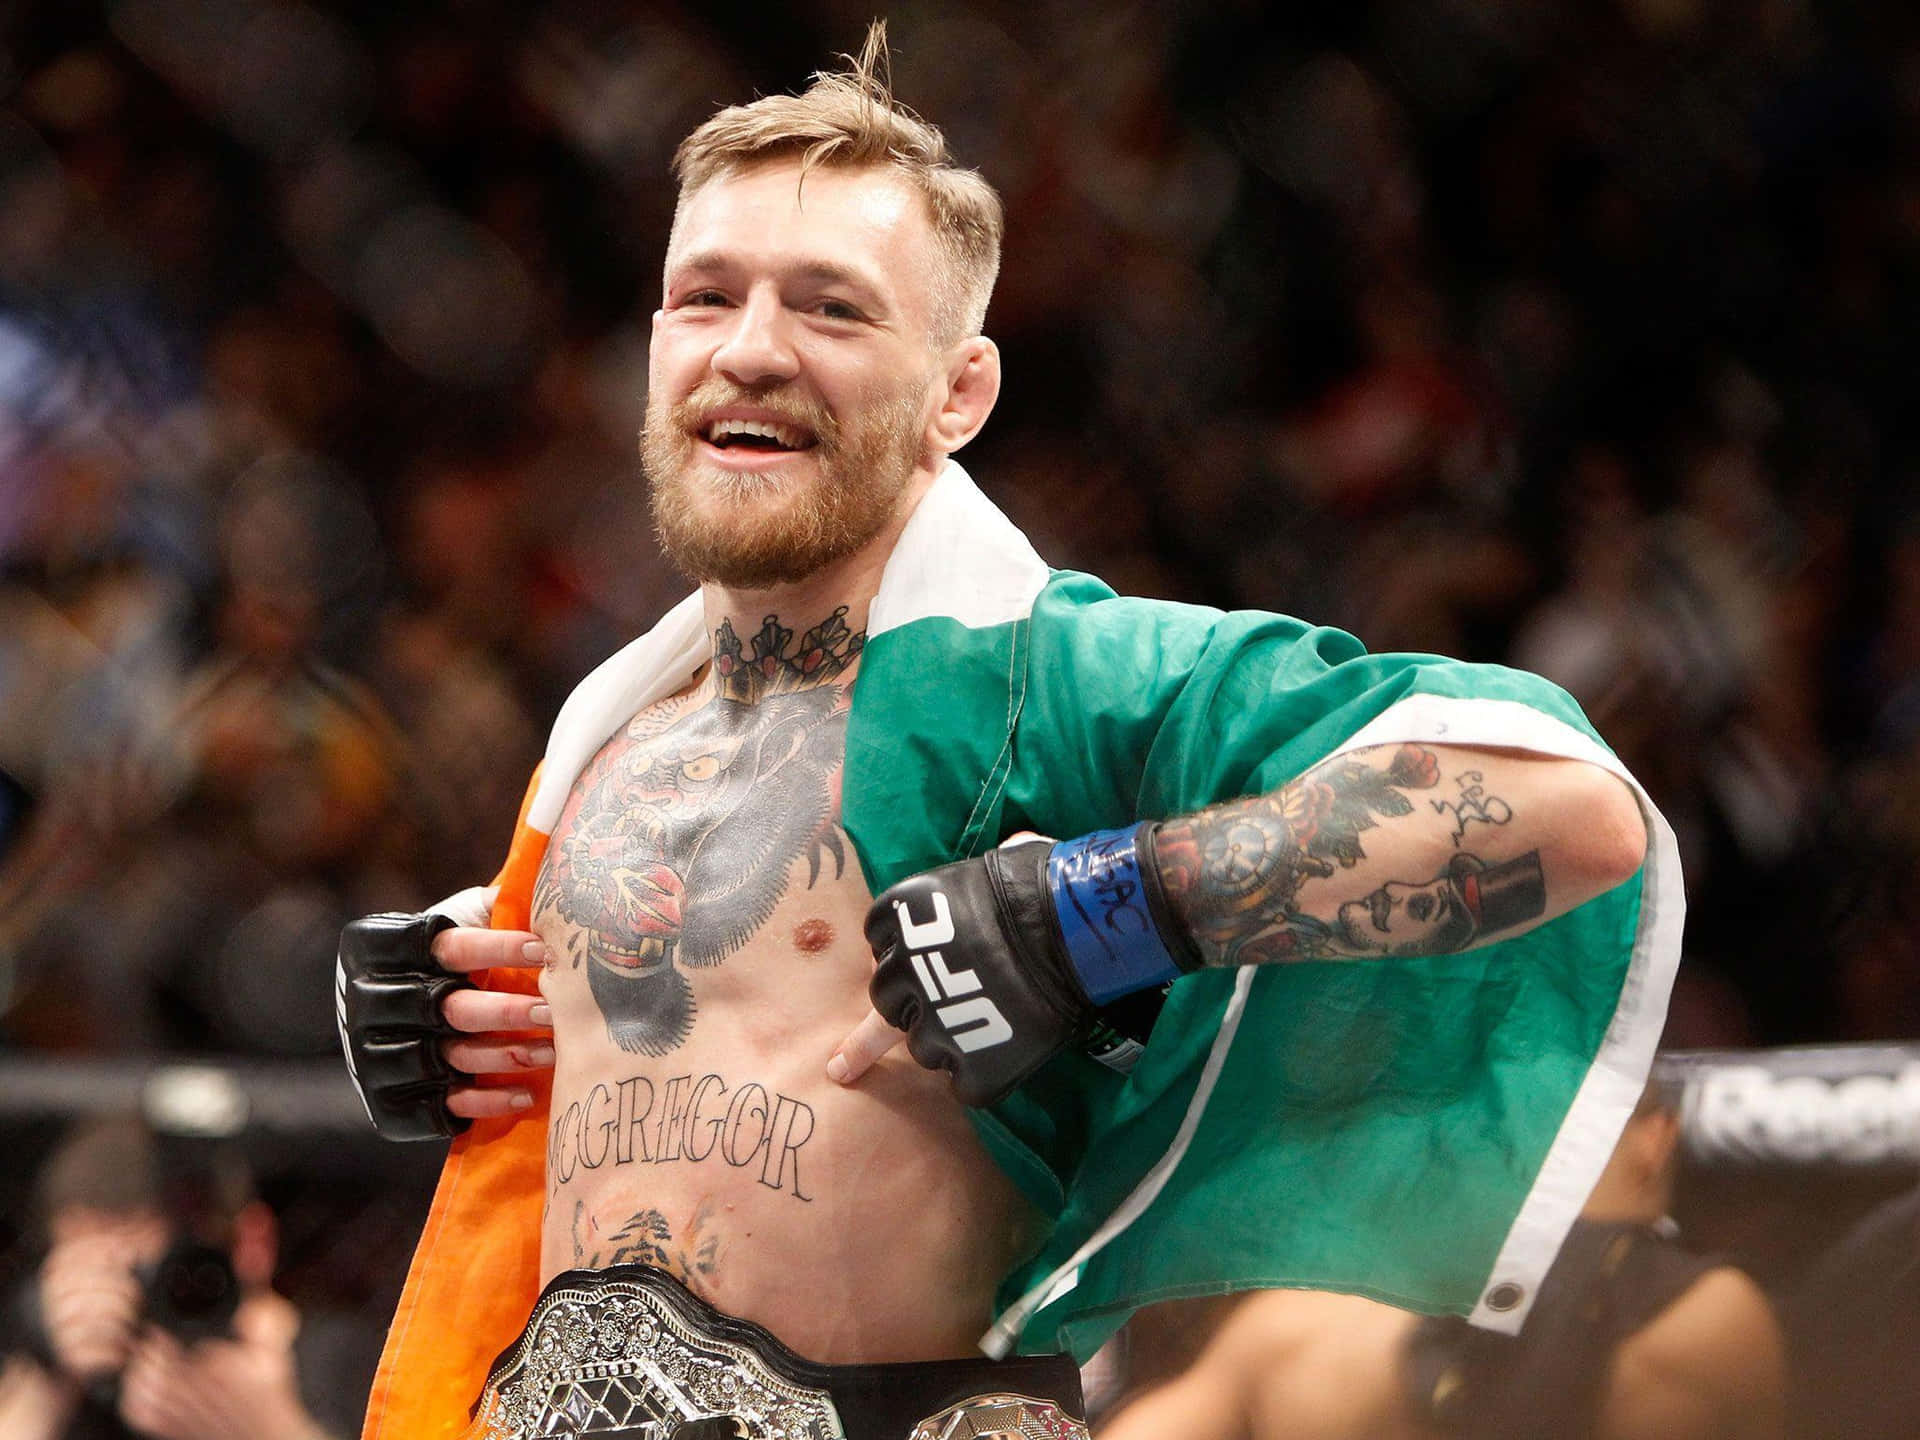 Rising to the Top: An interview with UFC World Champion Conor McGregor